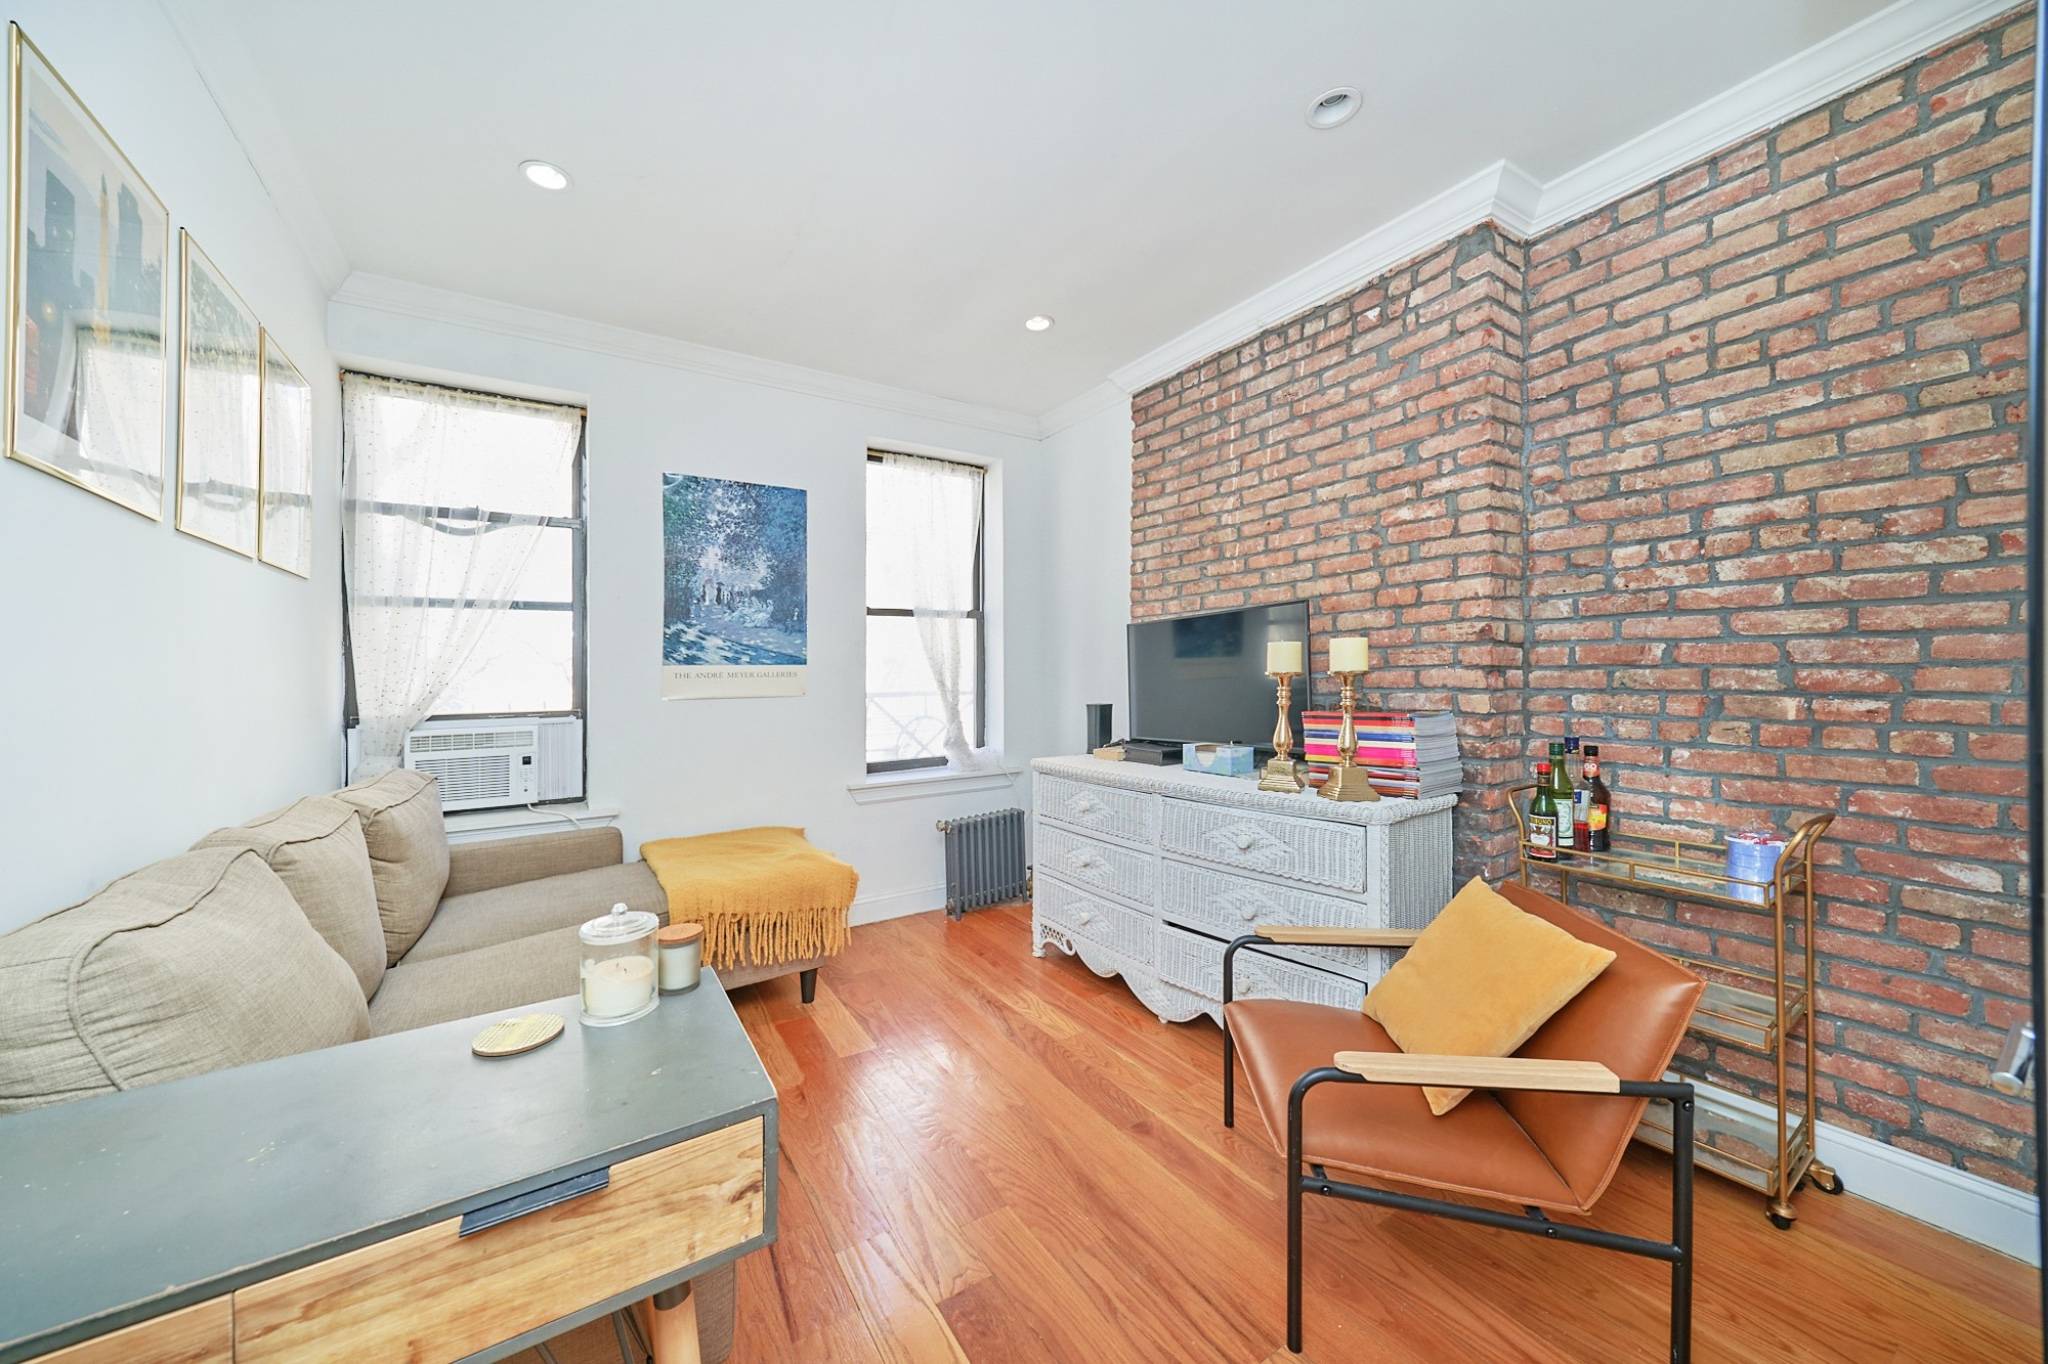 Beautiful 1 bedroom located in the heart of the Upper East Side available May 1stApartment Details In unit washer dryer Stainless steel appliances including dishwasher and microwave Hardwood floors Recessed ...